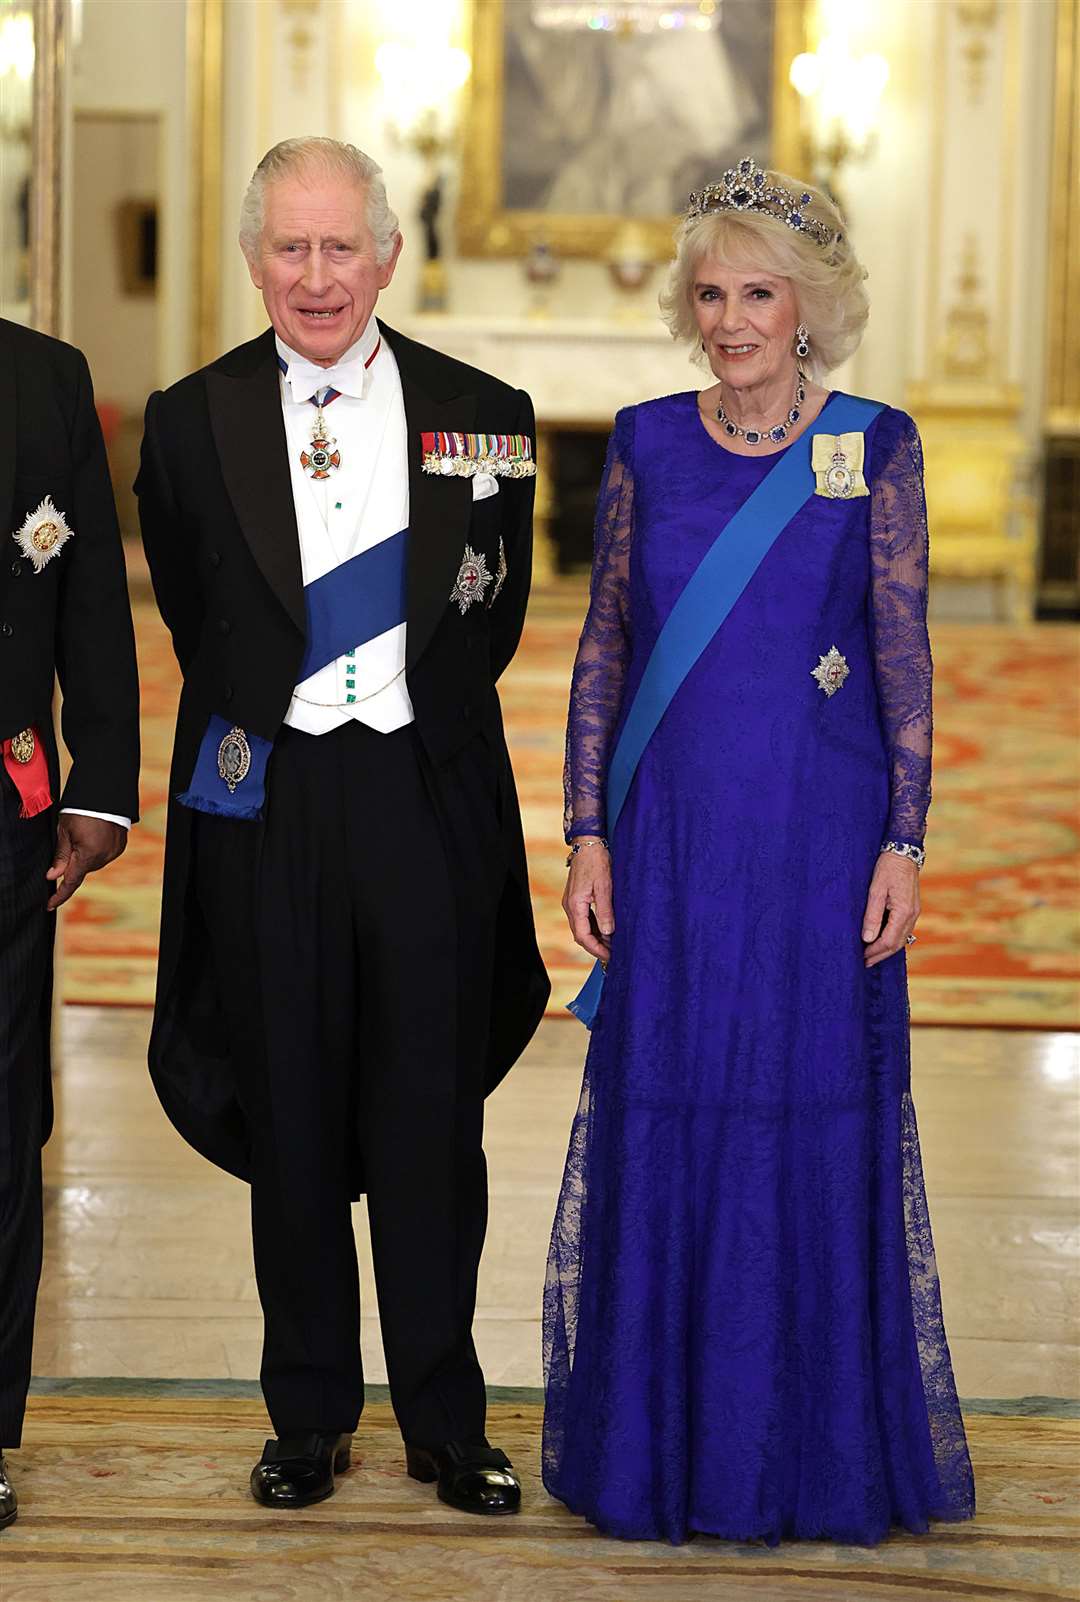 The King and the Queen Consort at State Banquet at Buckingham Palace (Chris Jackson/PA)